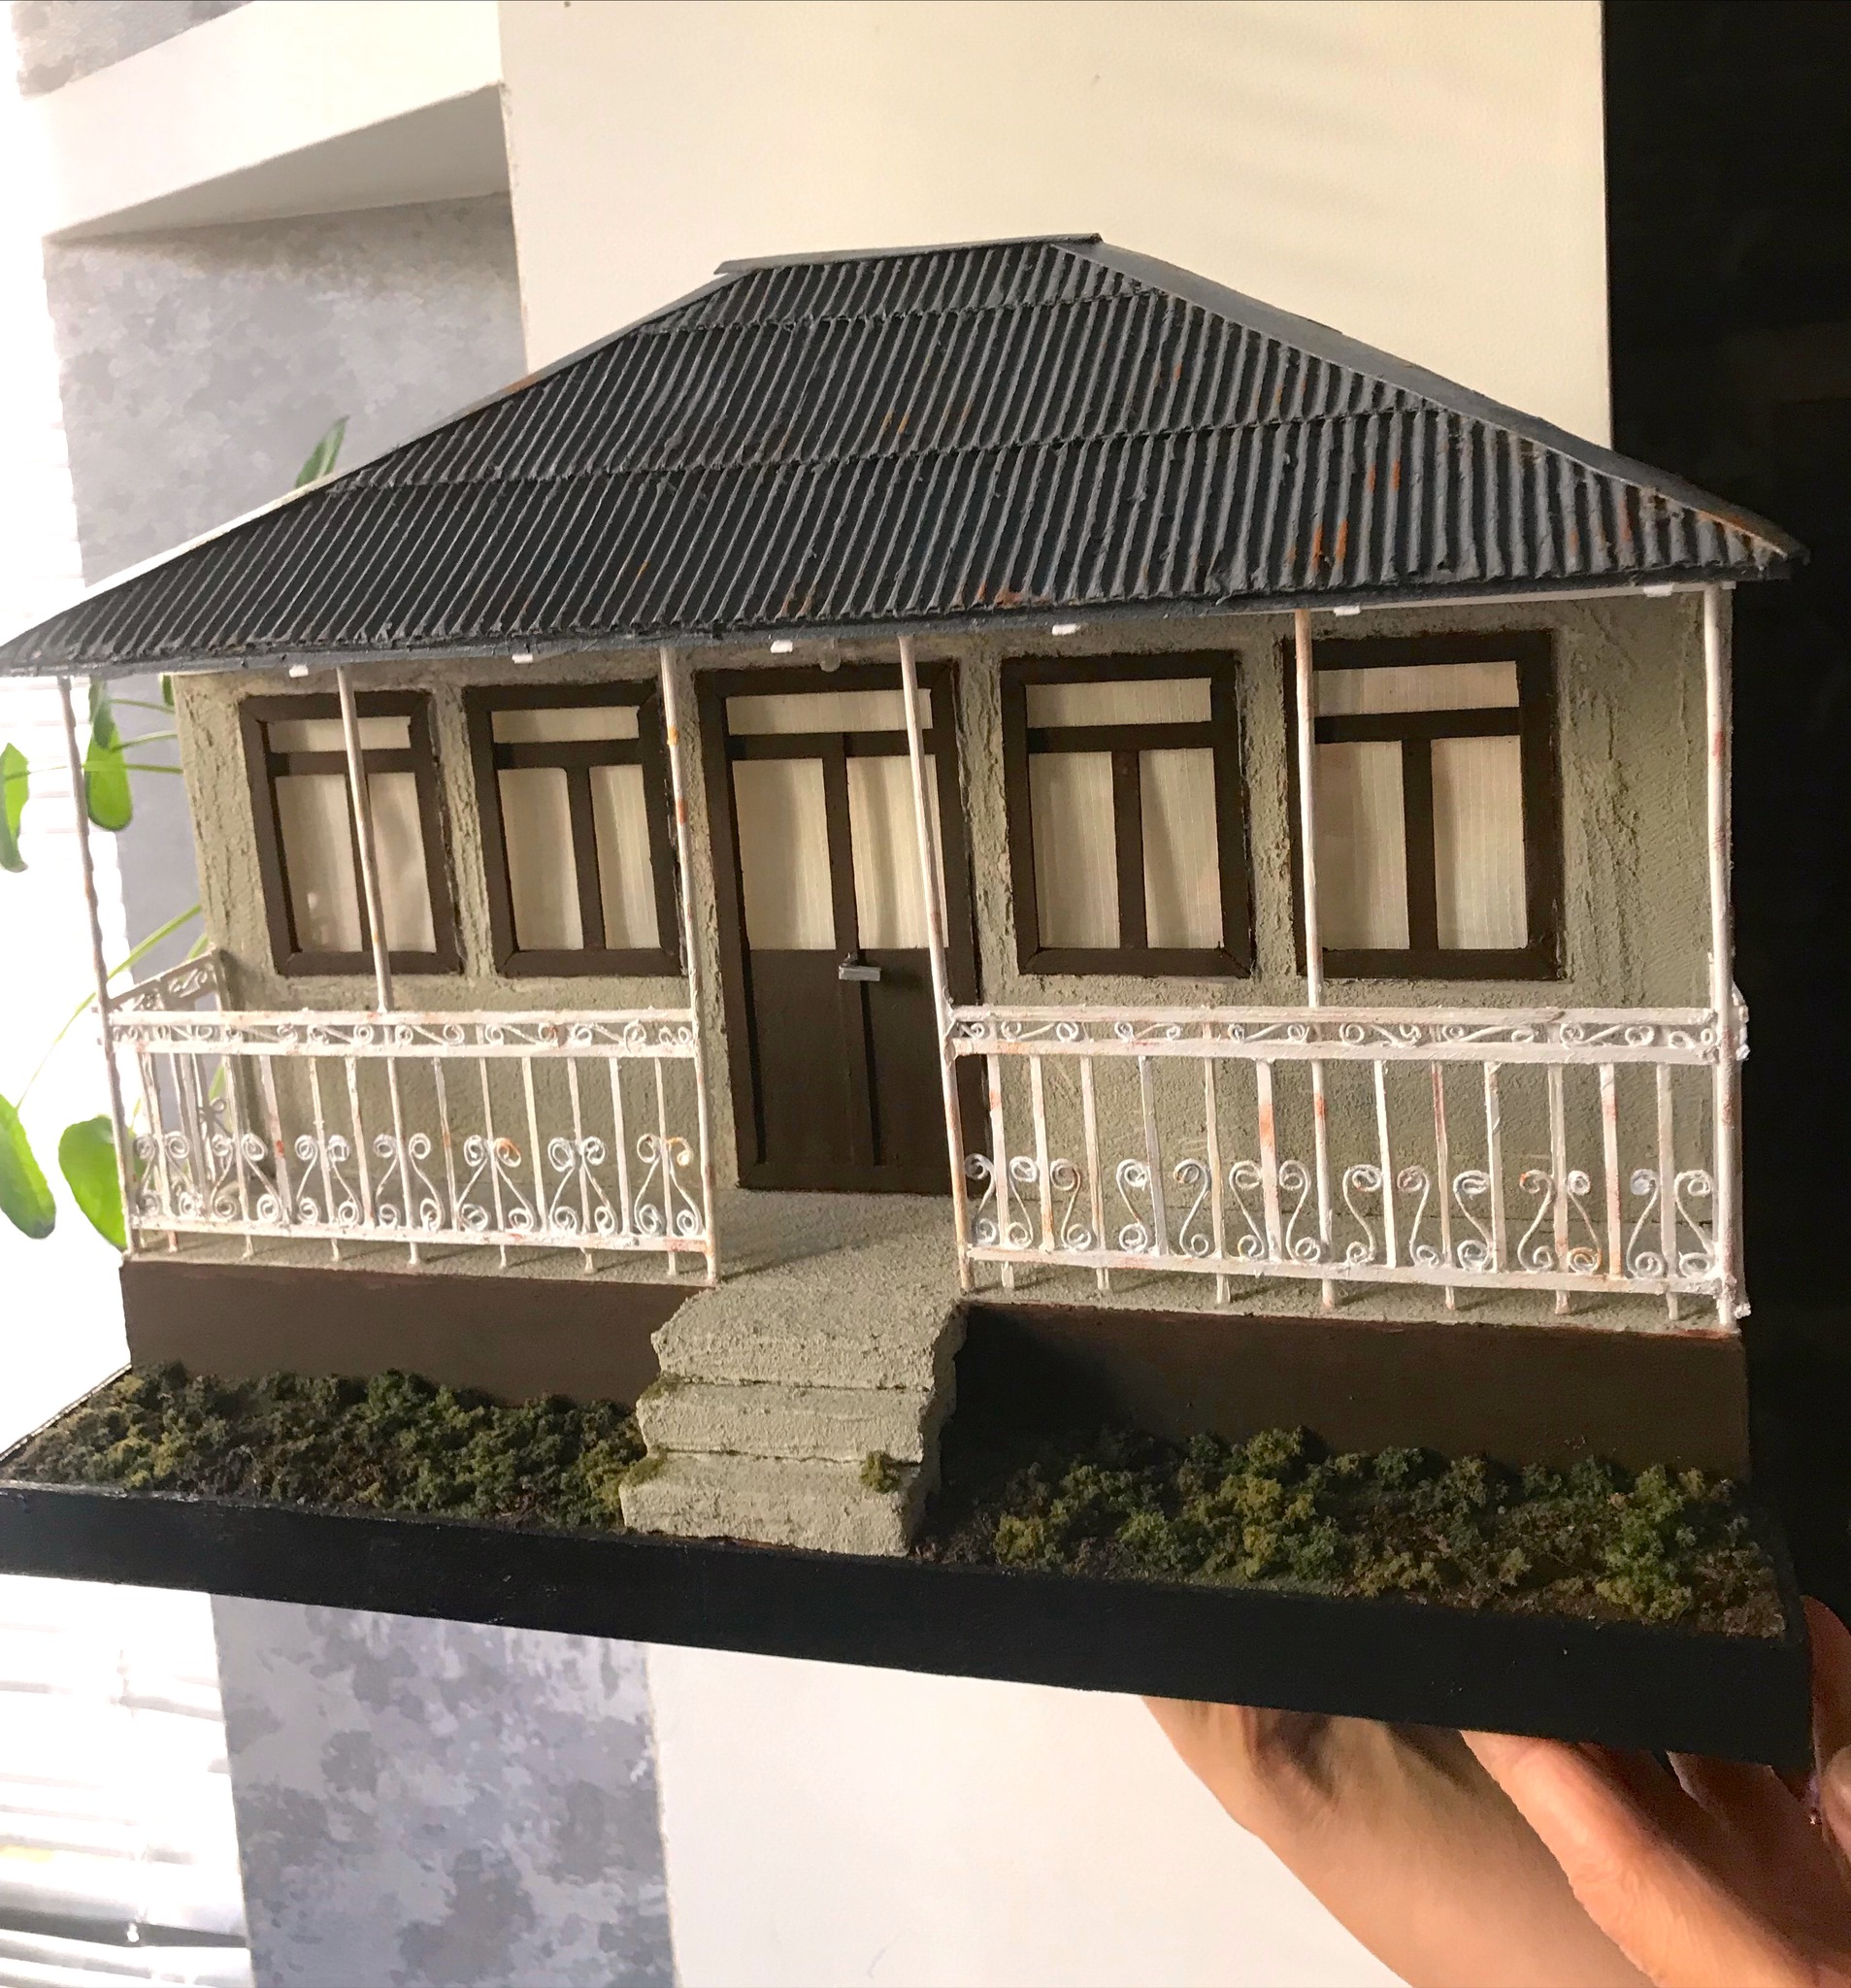 A miniature version of a real house